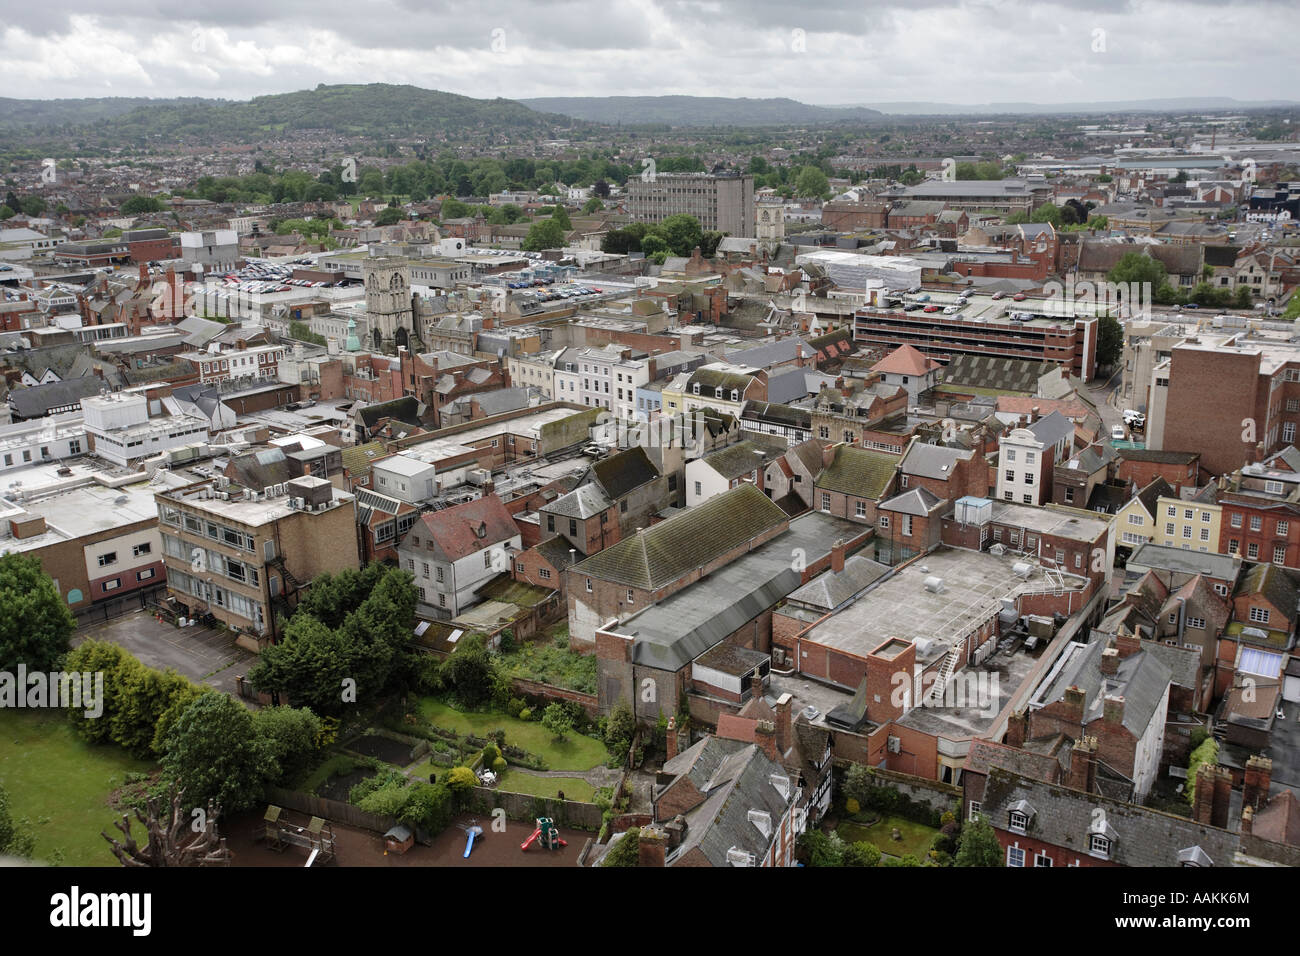 An aerial view of the city of Gloucester UK. Photograph taken from the top of the cathedral. Stock Photo